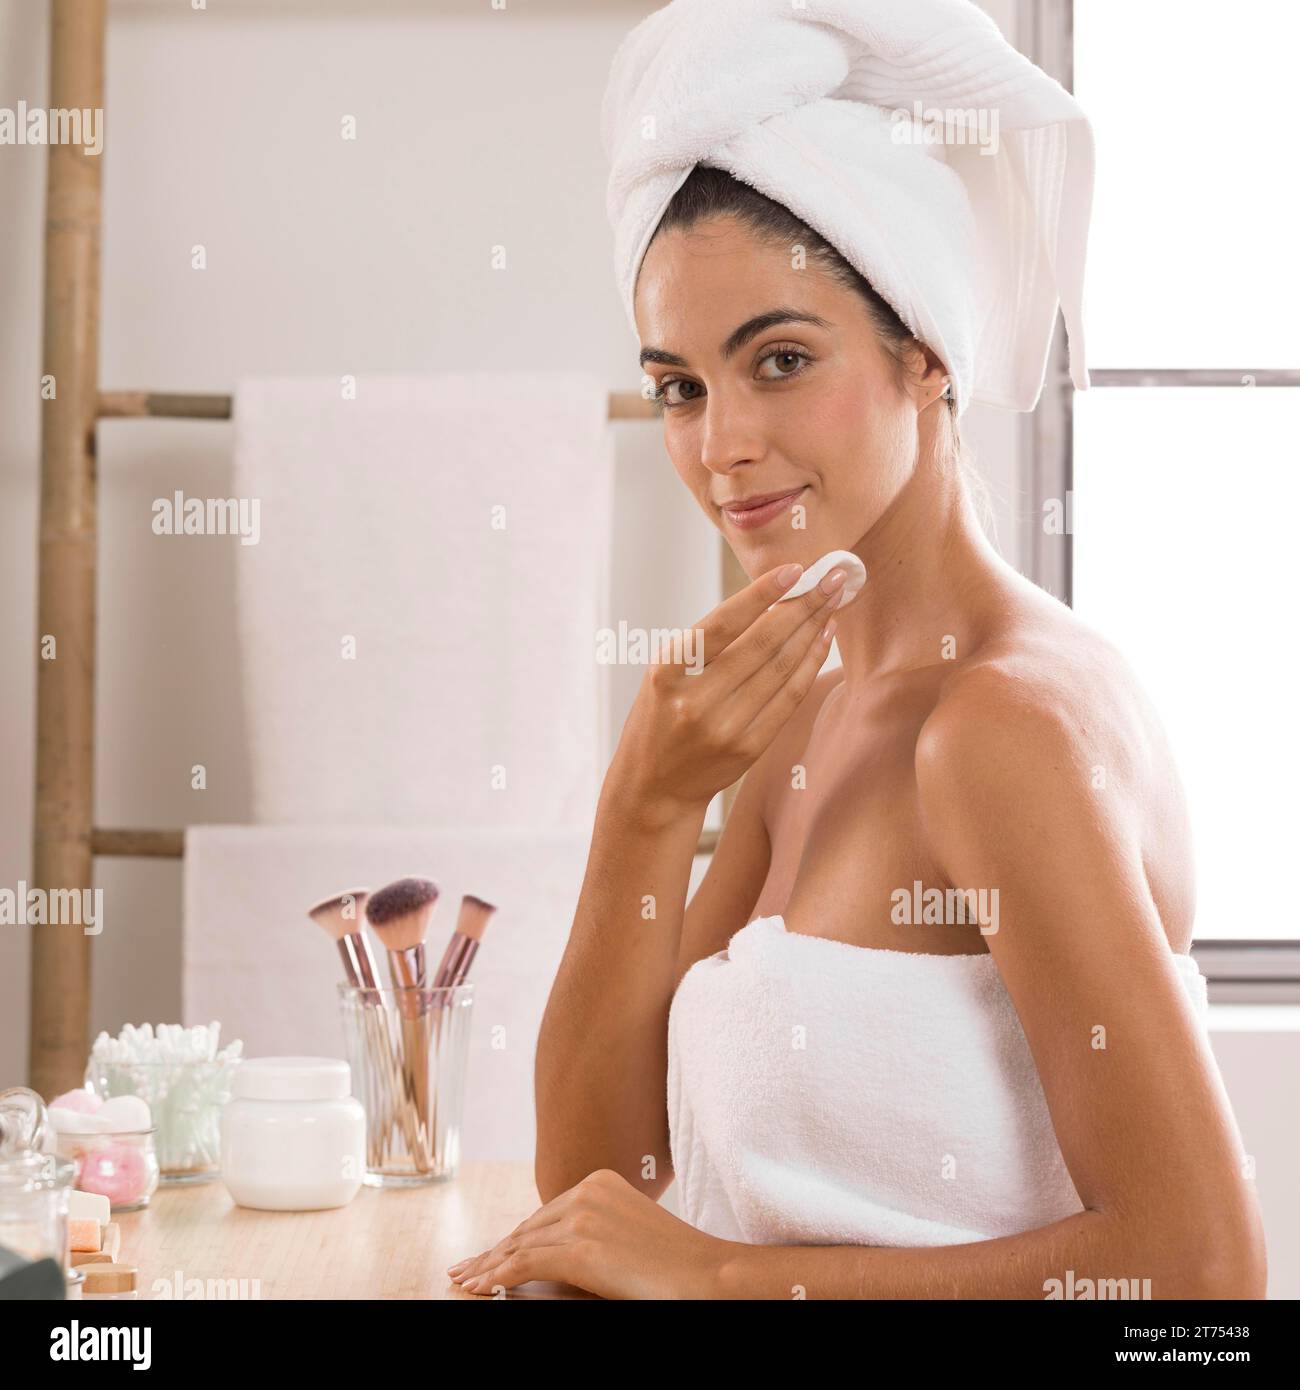 Side view woman wearing towels Stock Photo